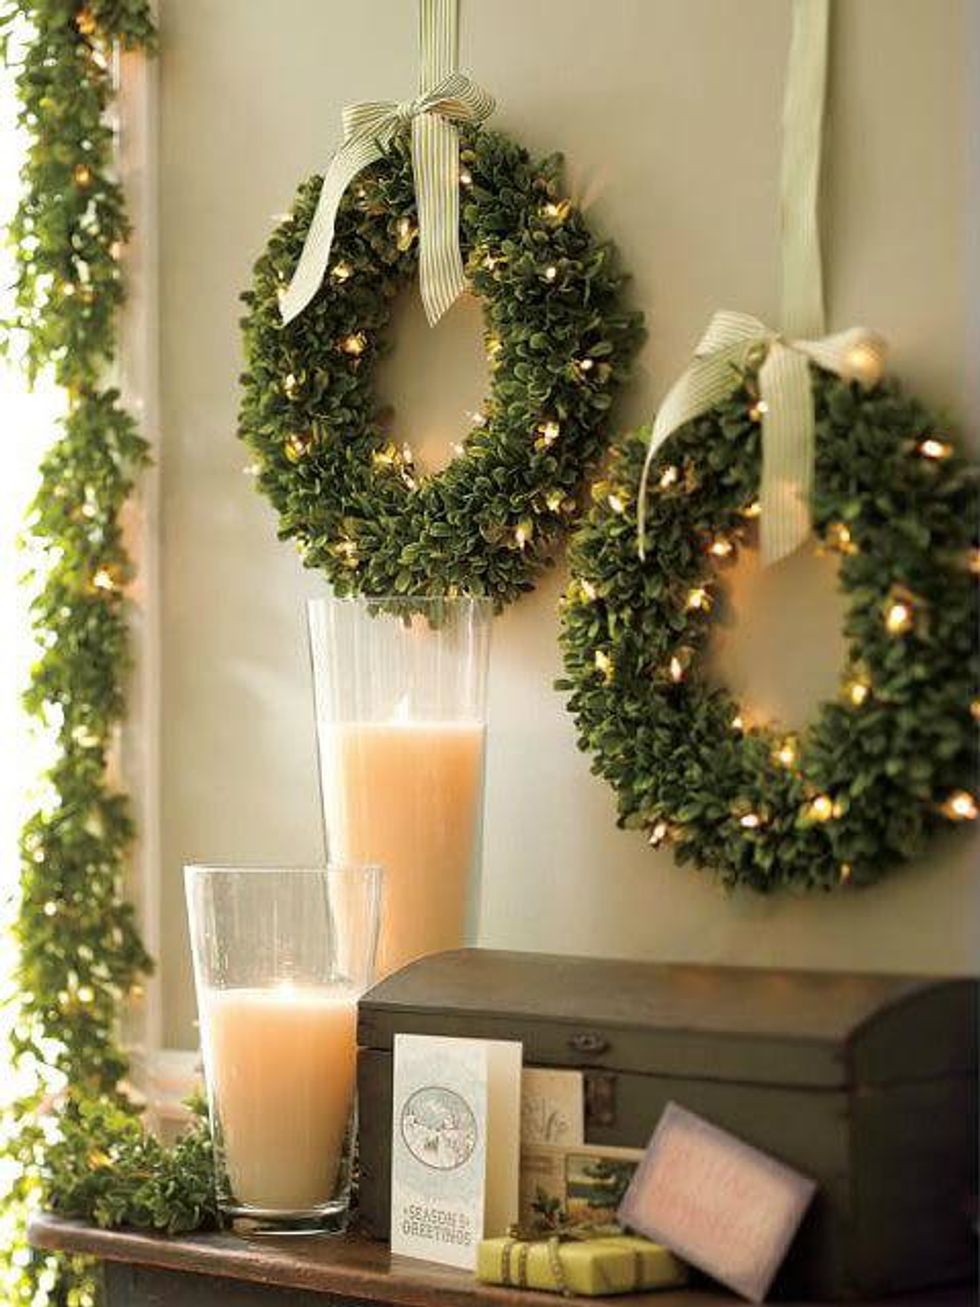 Boxwood wreaths from Pottery Barn